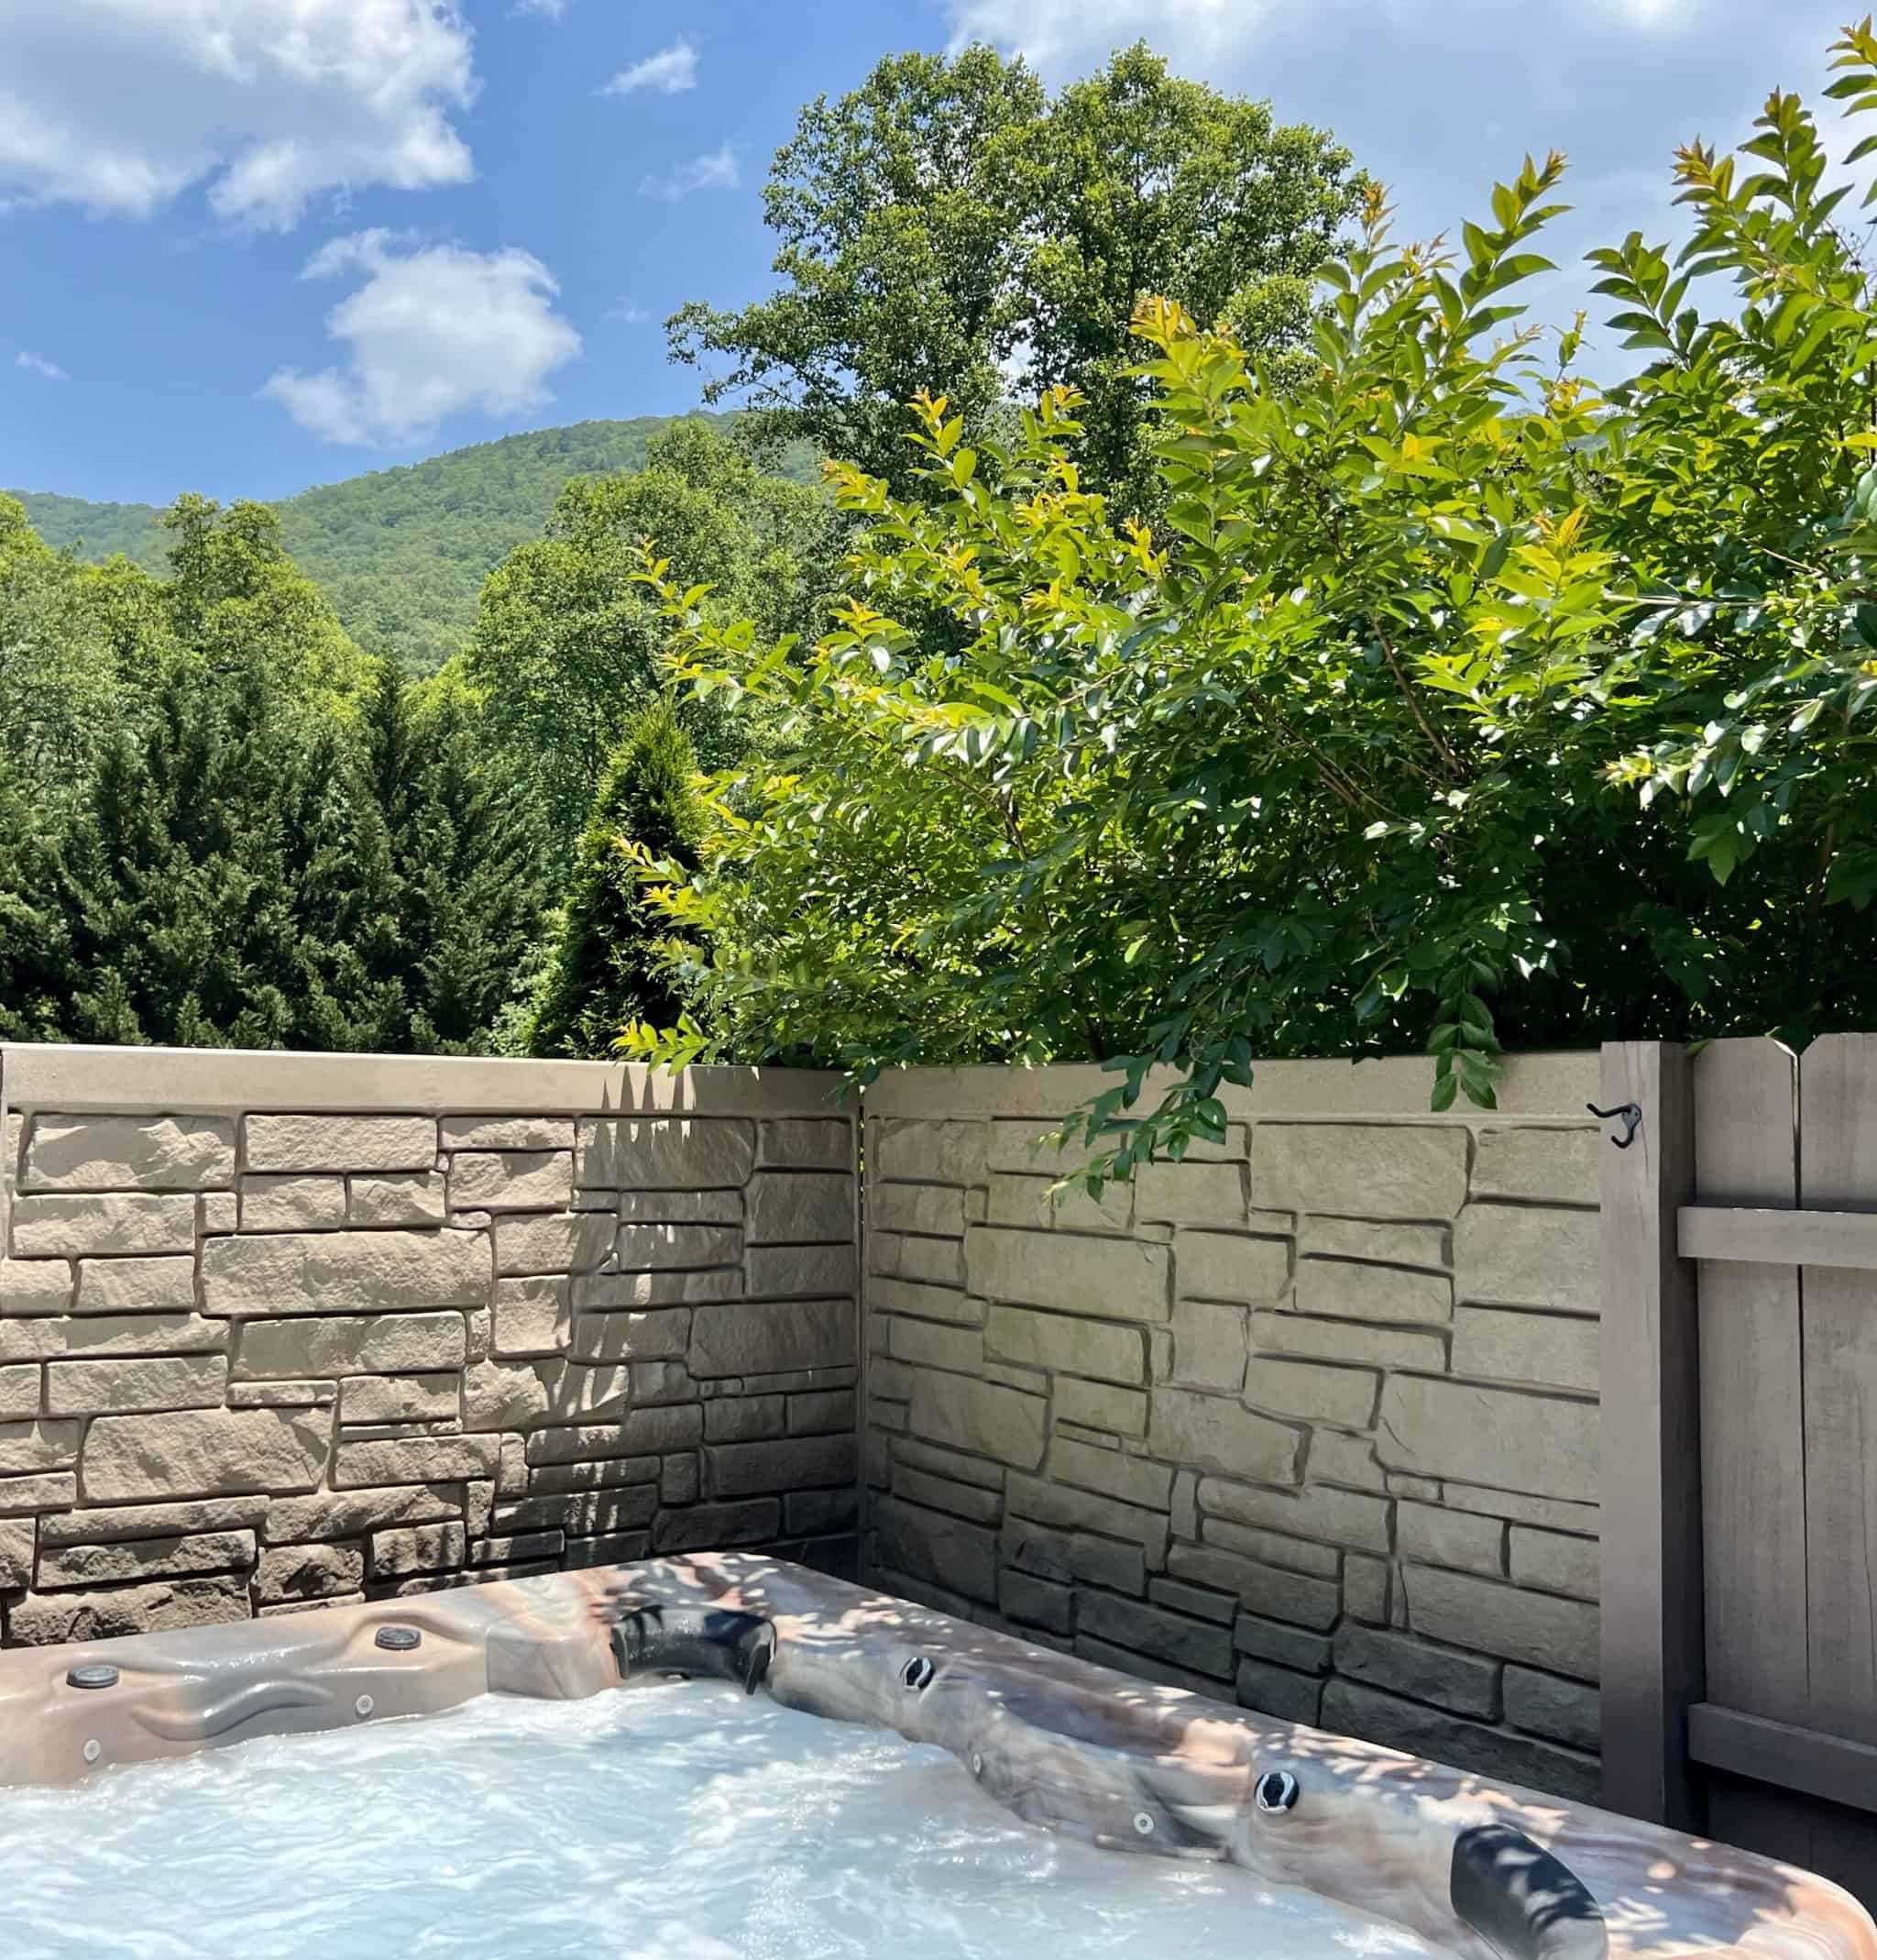 Relax in the spacious 5 person hot tub! - The Cove at Fairview Vacation Rentals - Asheville NC